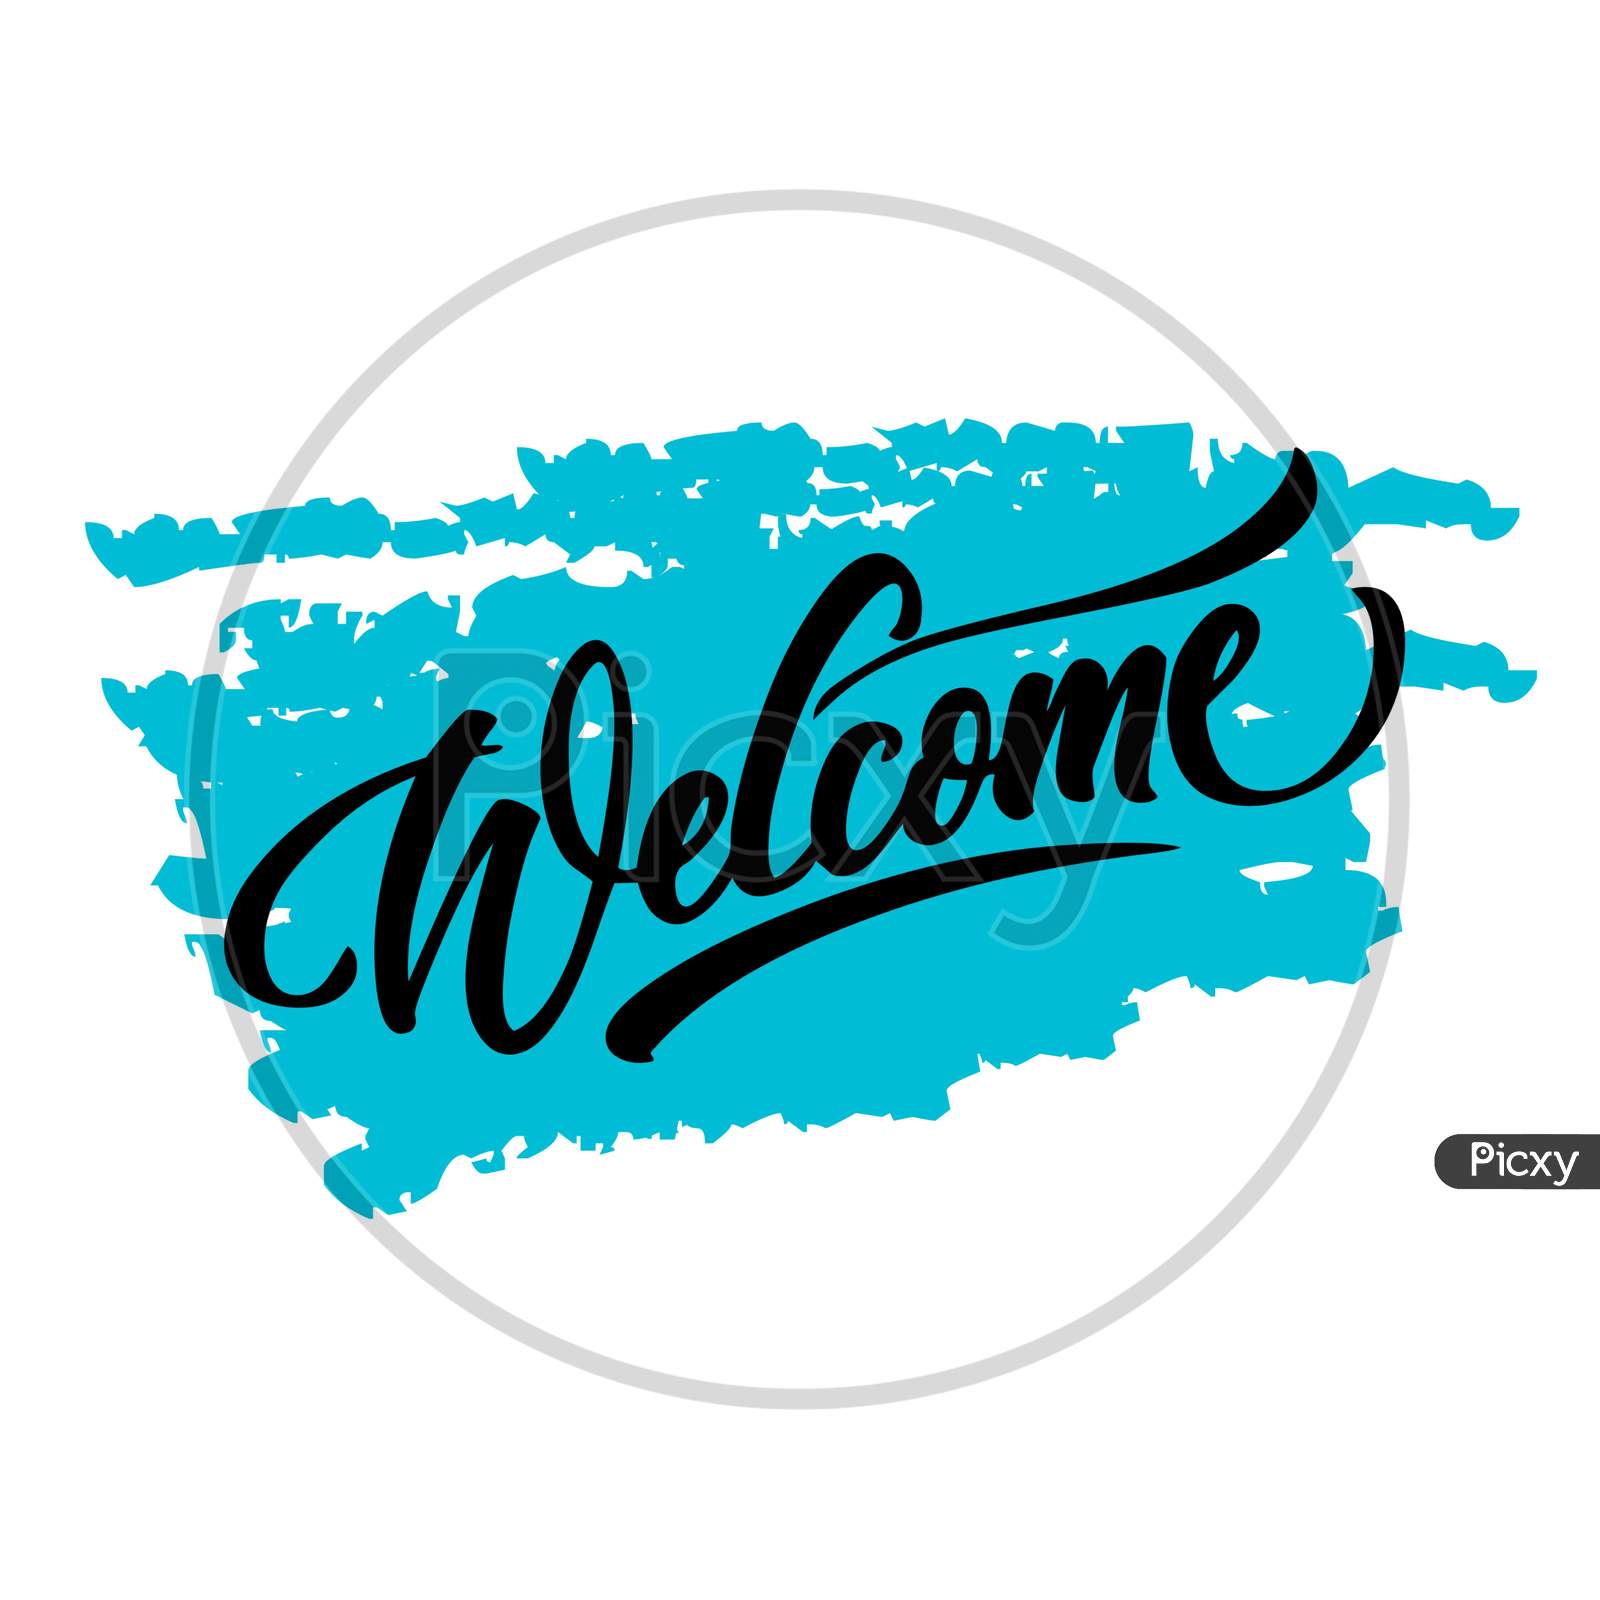 Welcome (White and green background black color fonts)